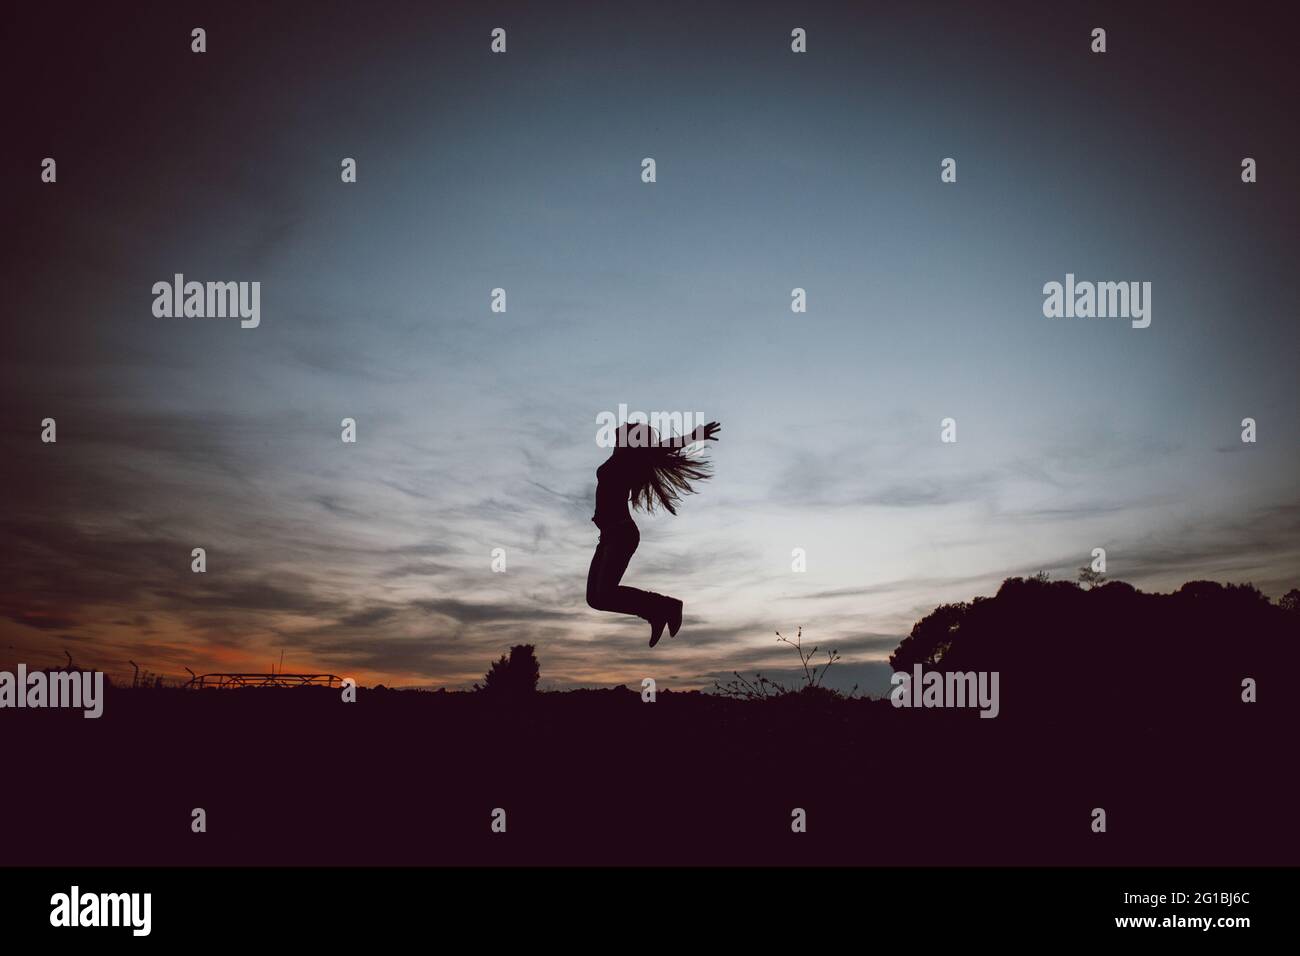 Low angle side view full body silhouette of unrecognizable female with outstretched arms and flying hair leaping above ground at sundown Stock Photo